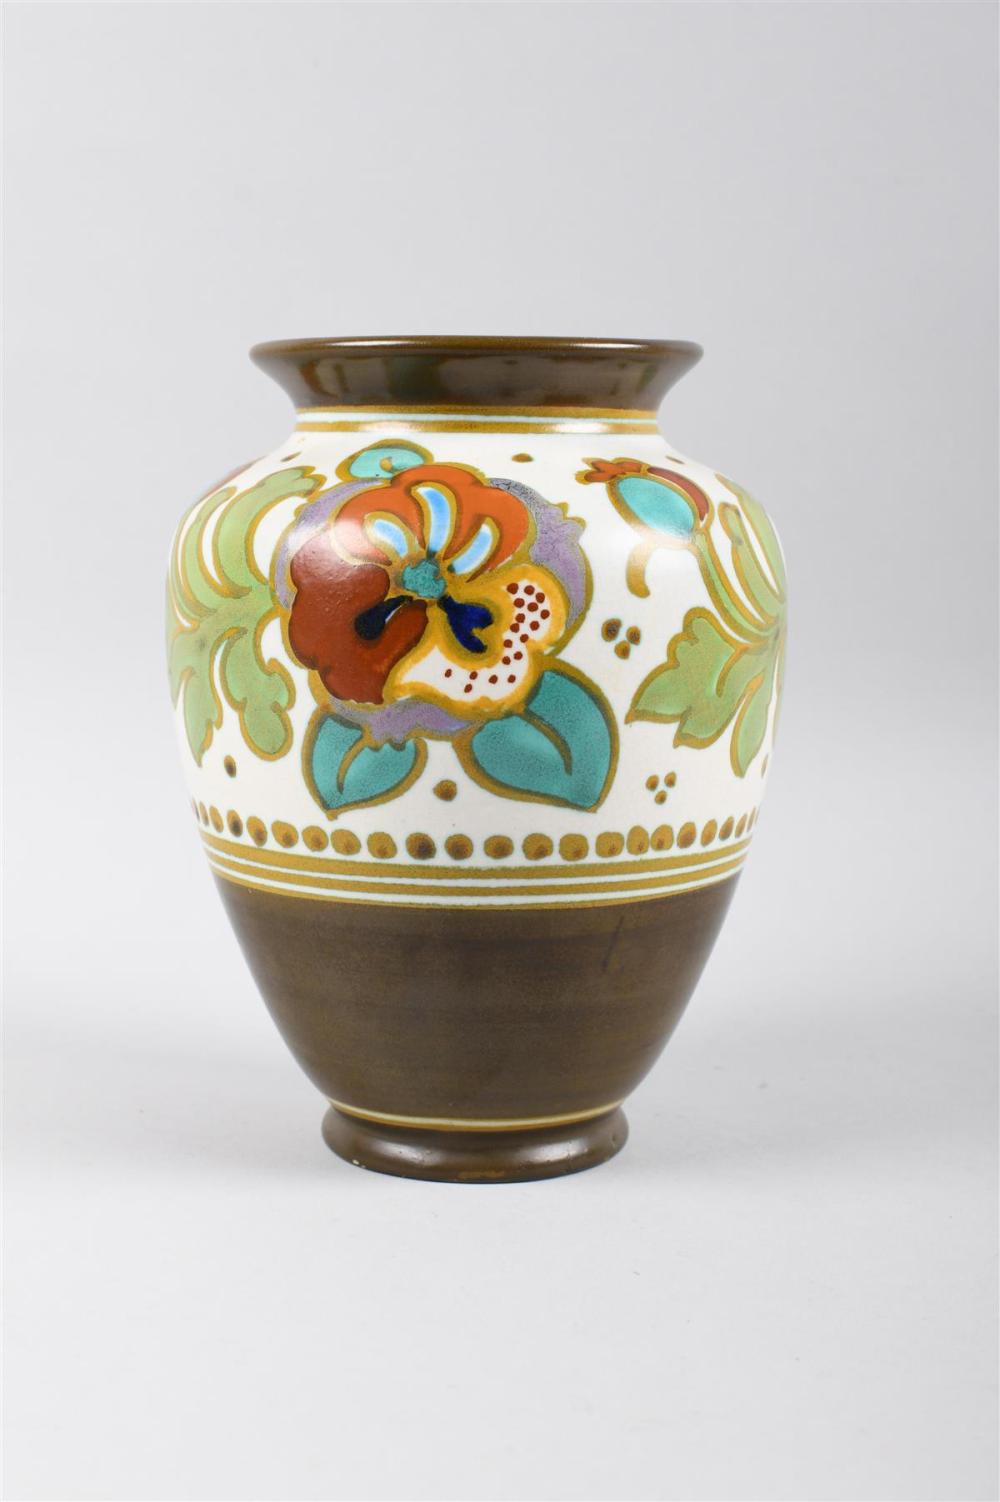 GOUDA 'PZH' VASE, MARKED WITH LETTER